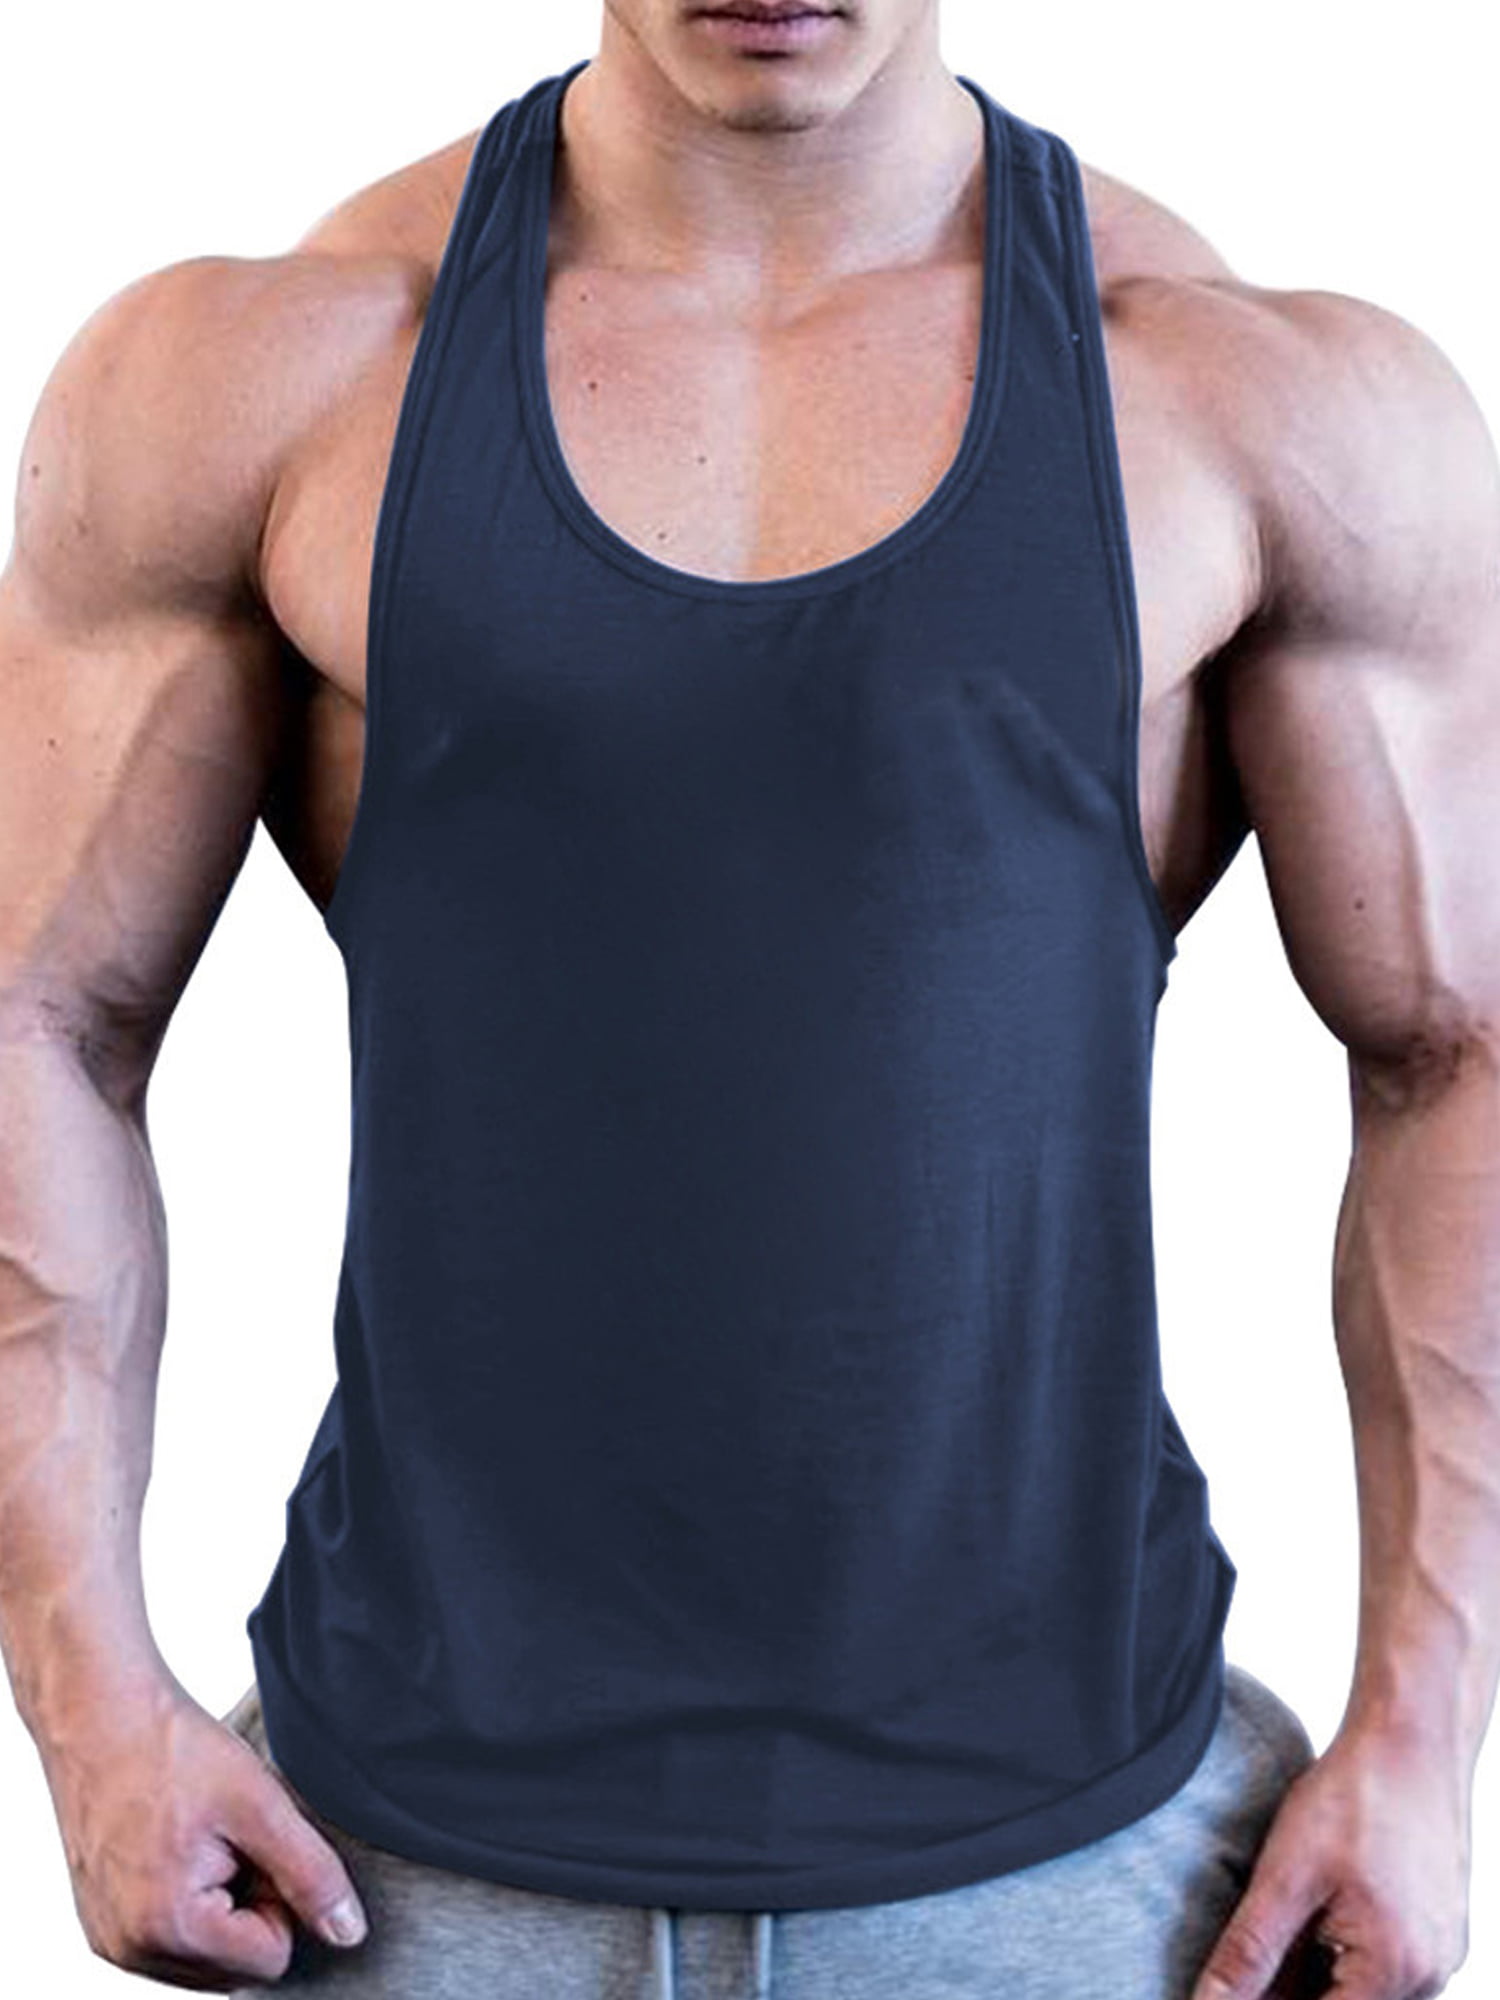 Mens Fitness Tank Tops Bodybuilding Gym Sports Muscle T-Shirt Tee Vest Plus Size 